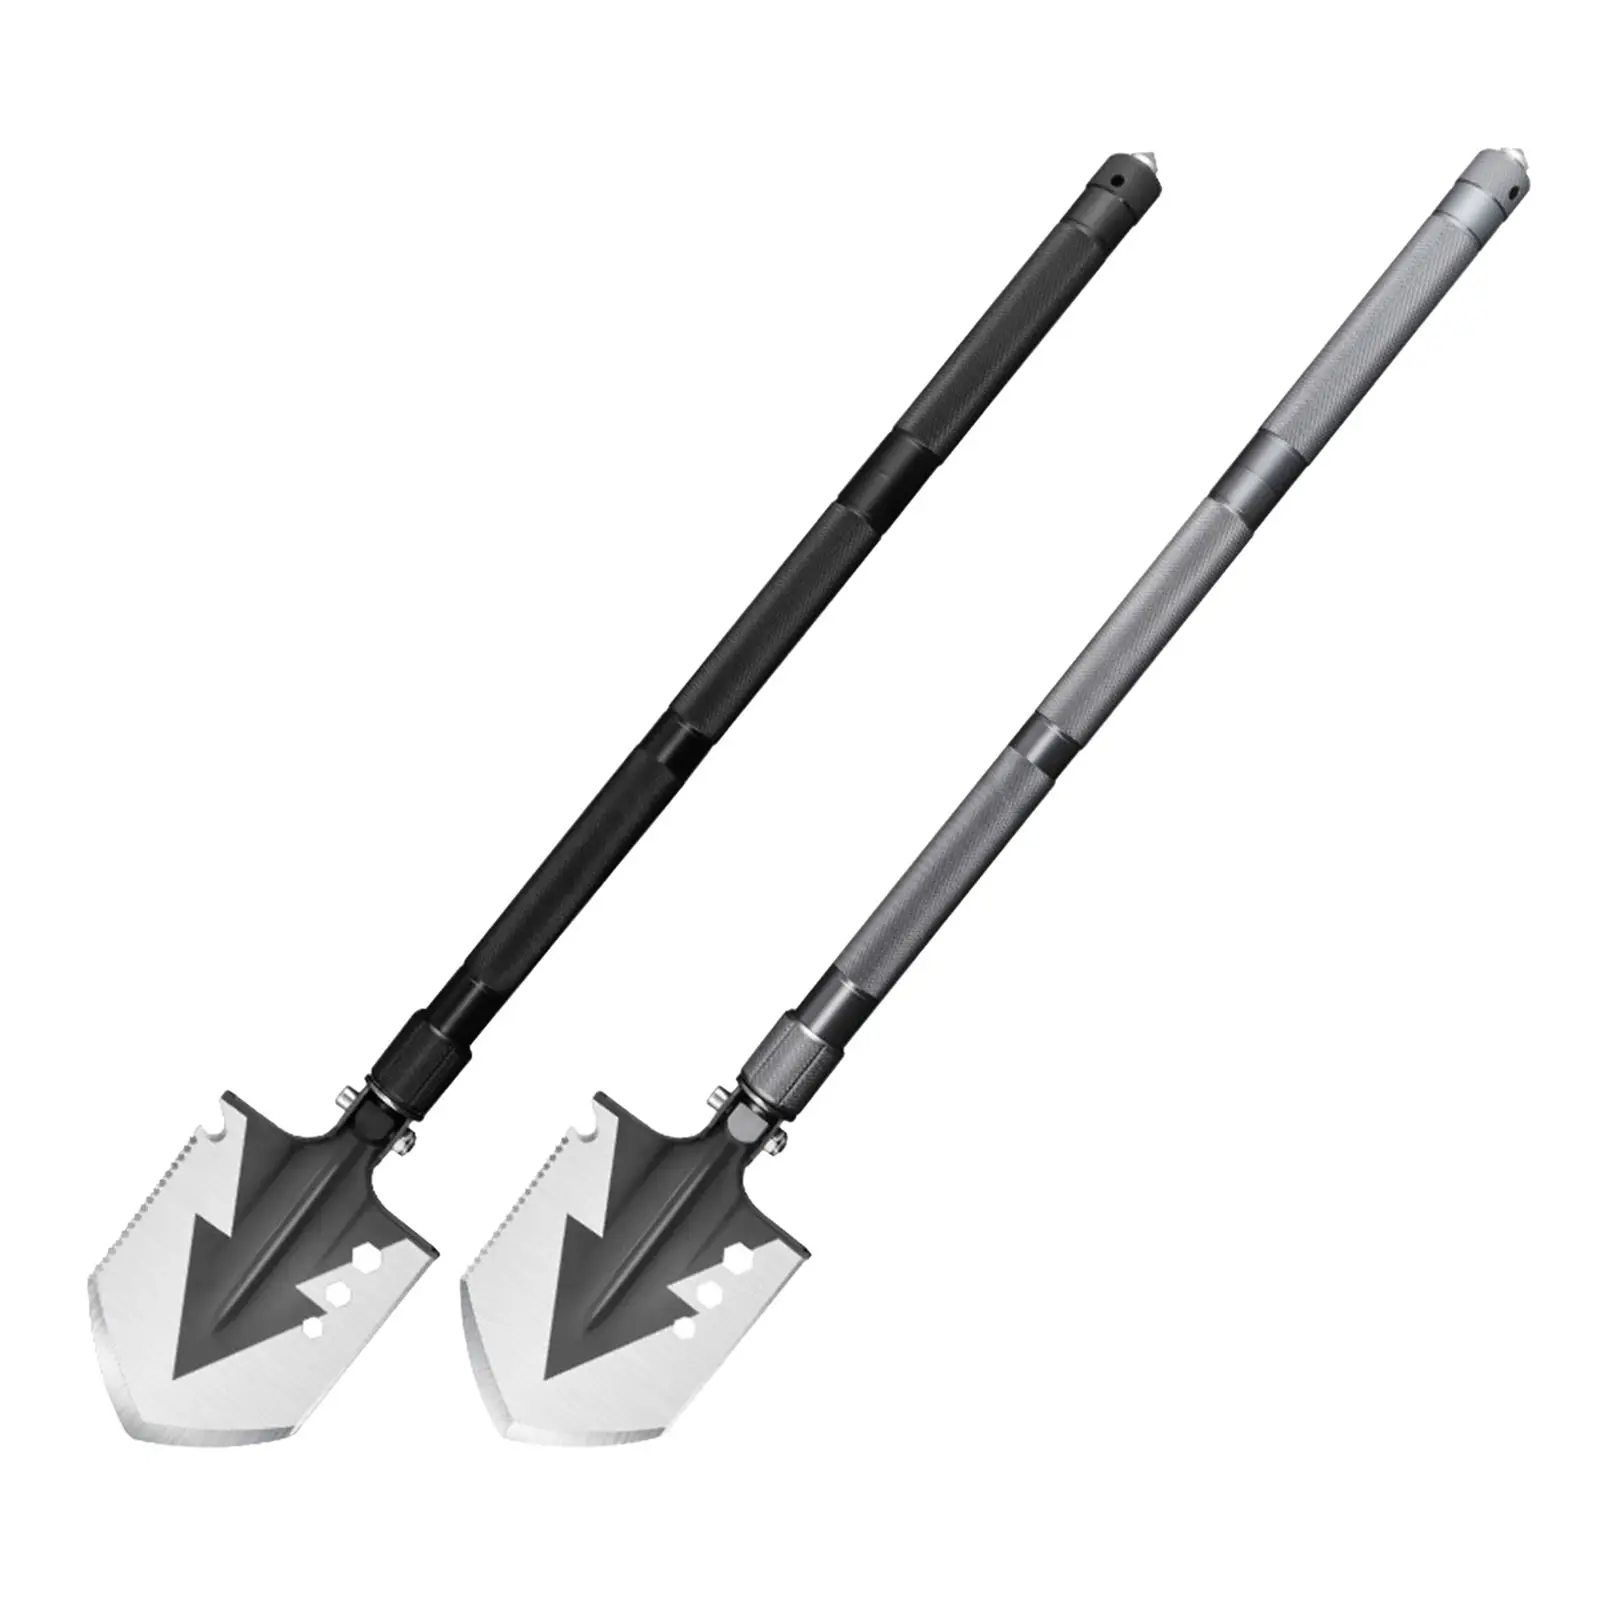 Military Folding Shovel - Tactical Multitool Spade Kit for Camping, Hiking, Backpacking, Fishing, Trench Entrenching Tools